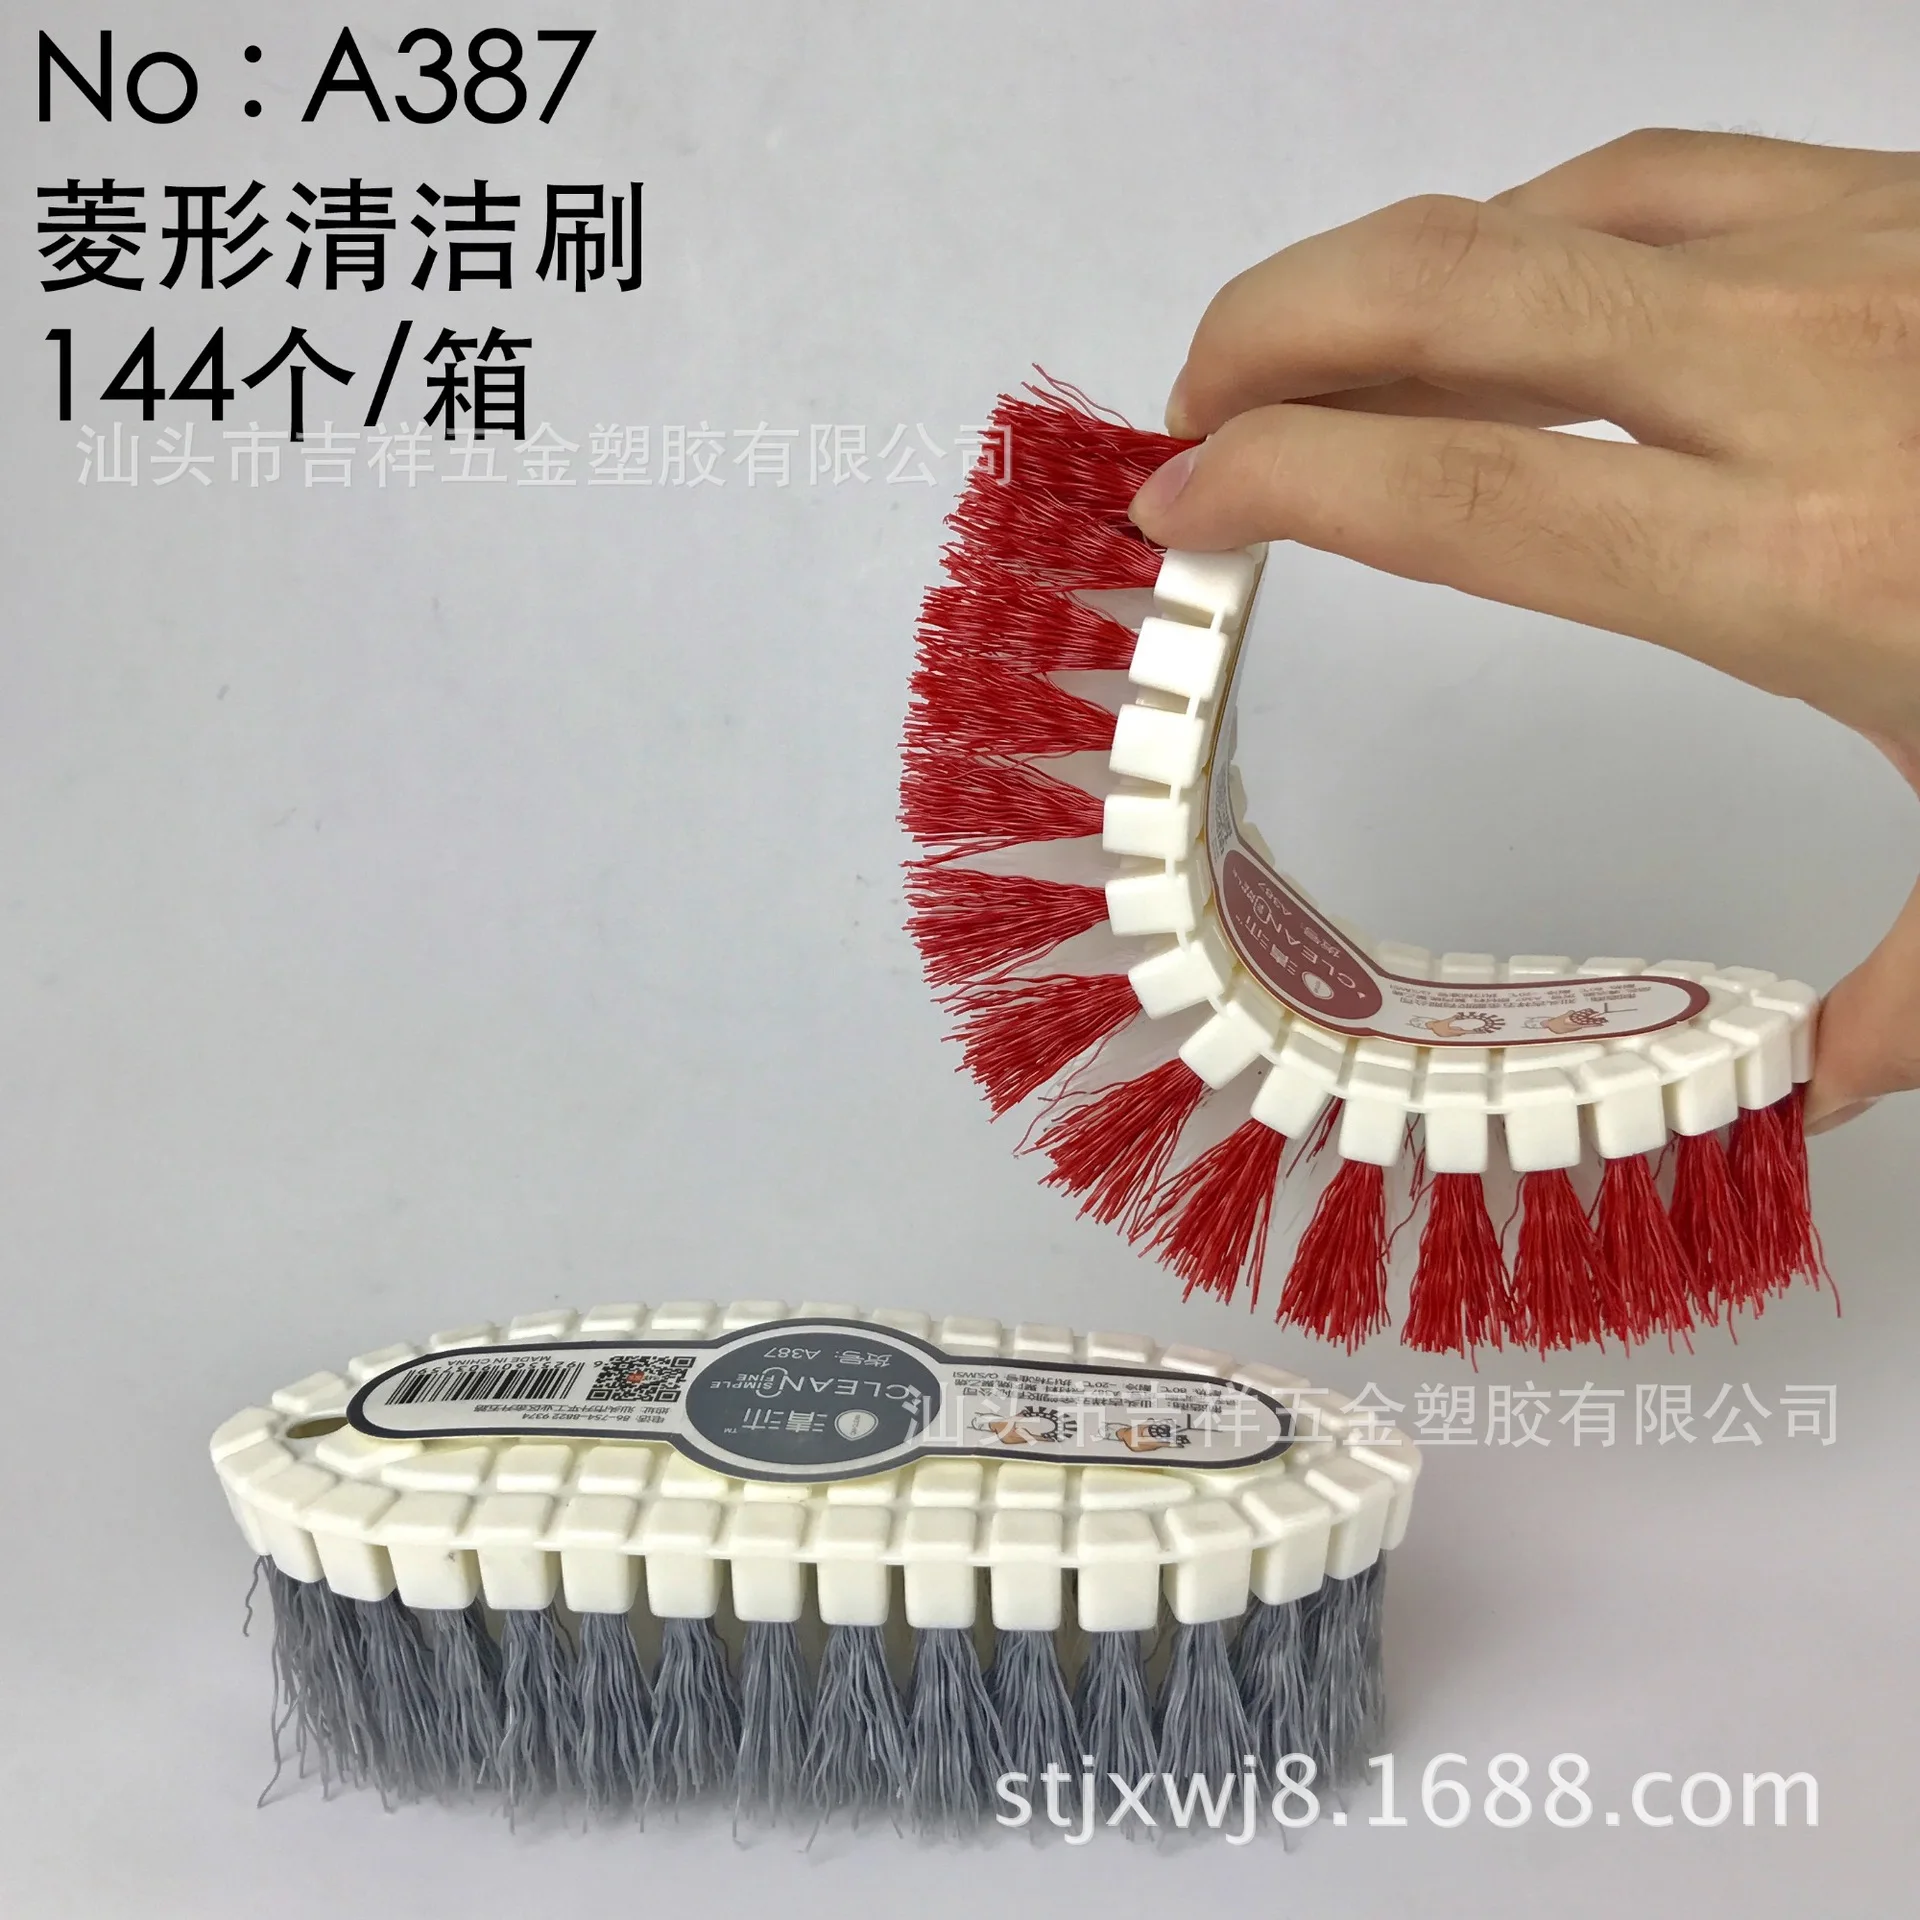 Qing Mu Manufacturers with Handle Steel Wire Ball Kitchen Supplies Cleaning Ball Household Iron Ball Brush Wash Dishes Pot Brush